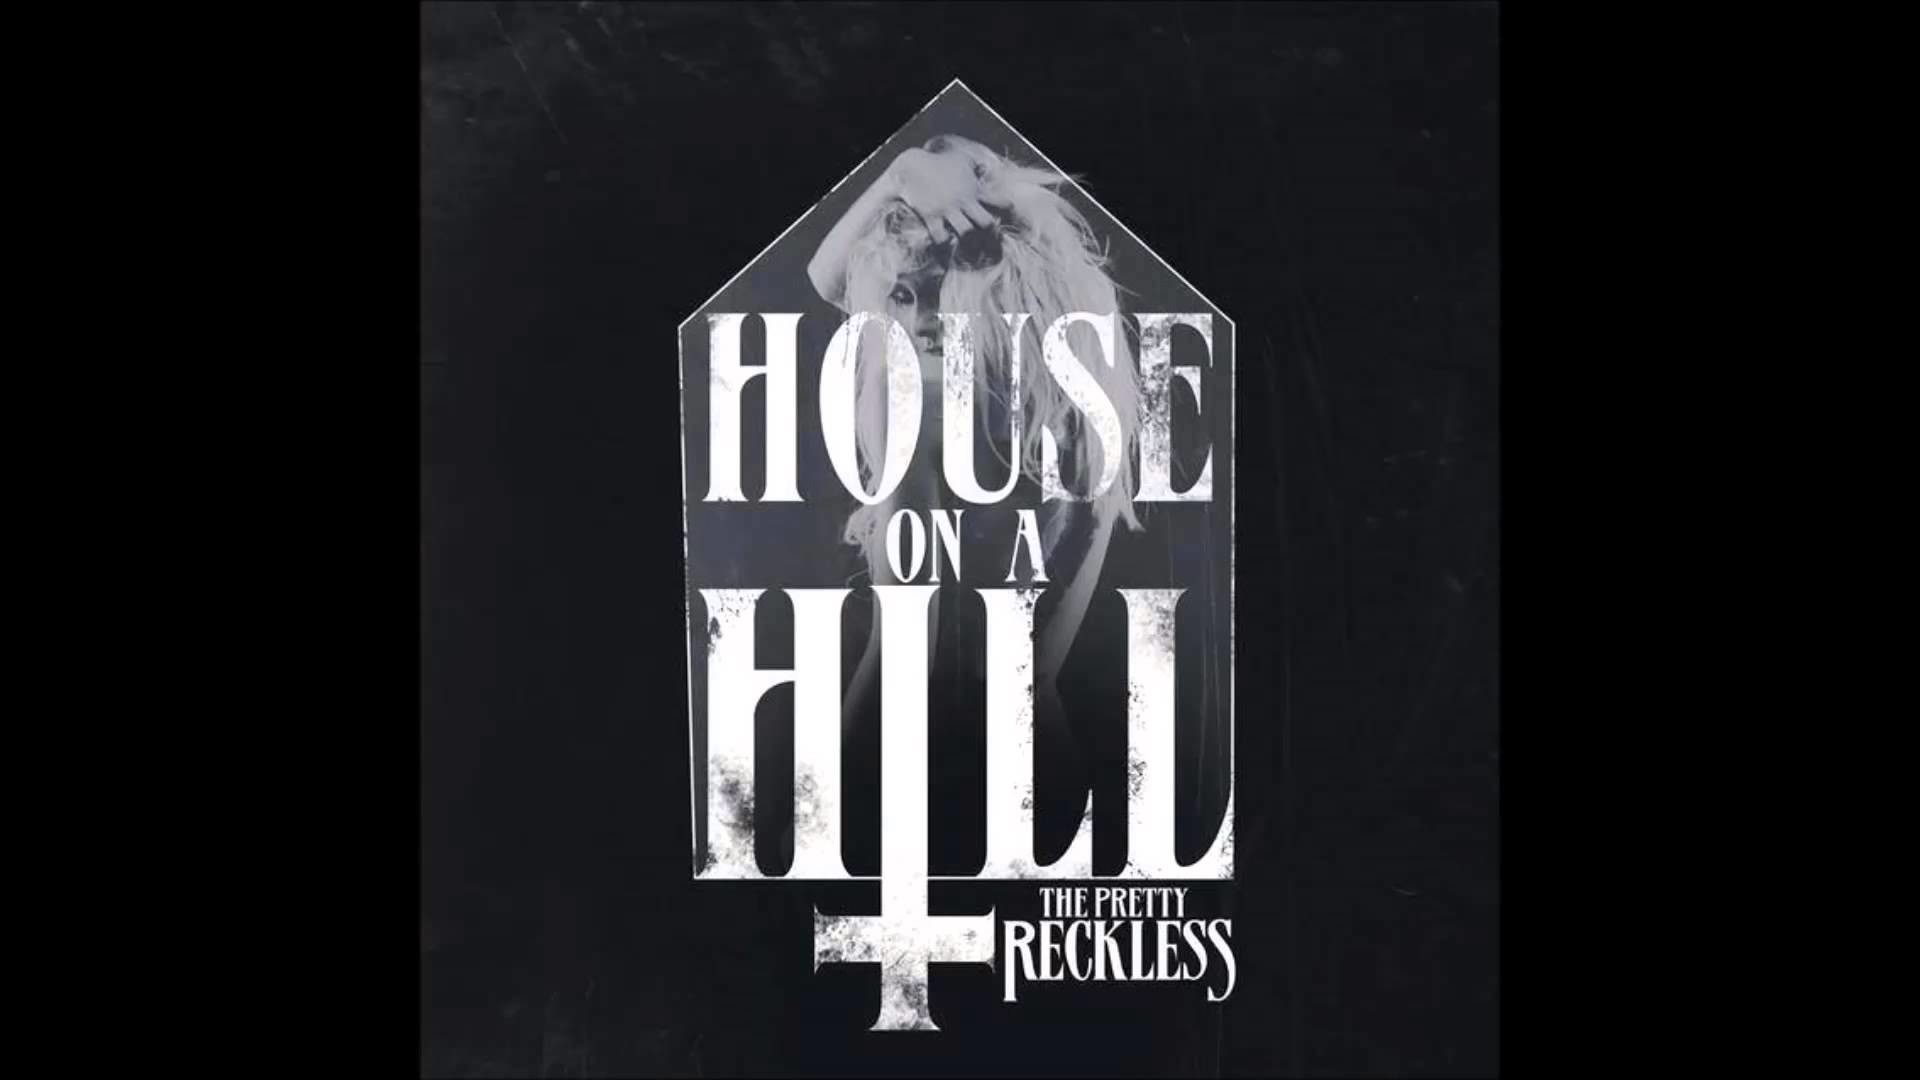 1920x1080 [SINGLE] The Pretty Reckless - House On a Hill